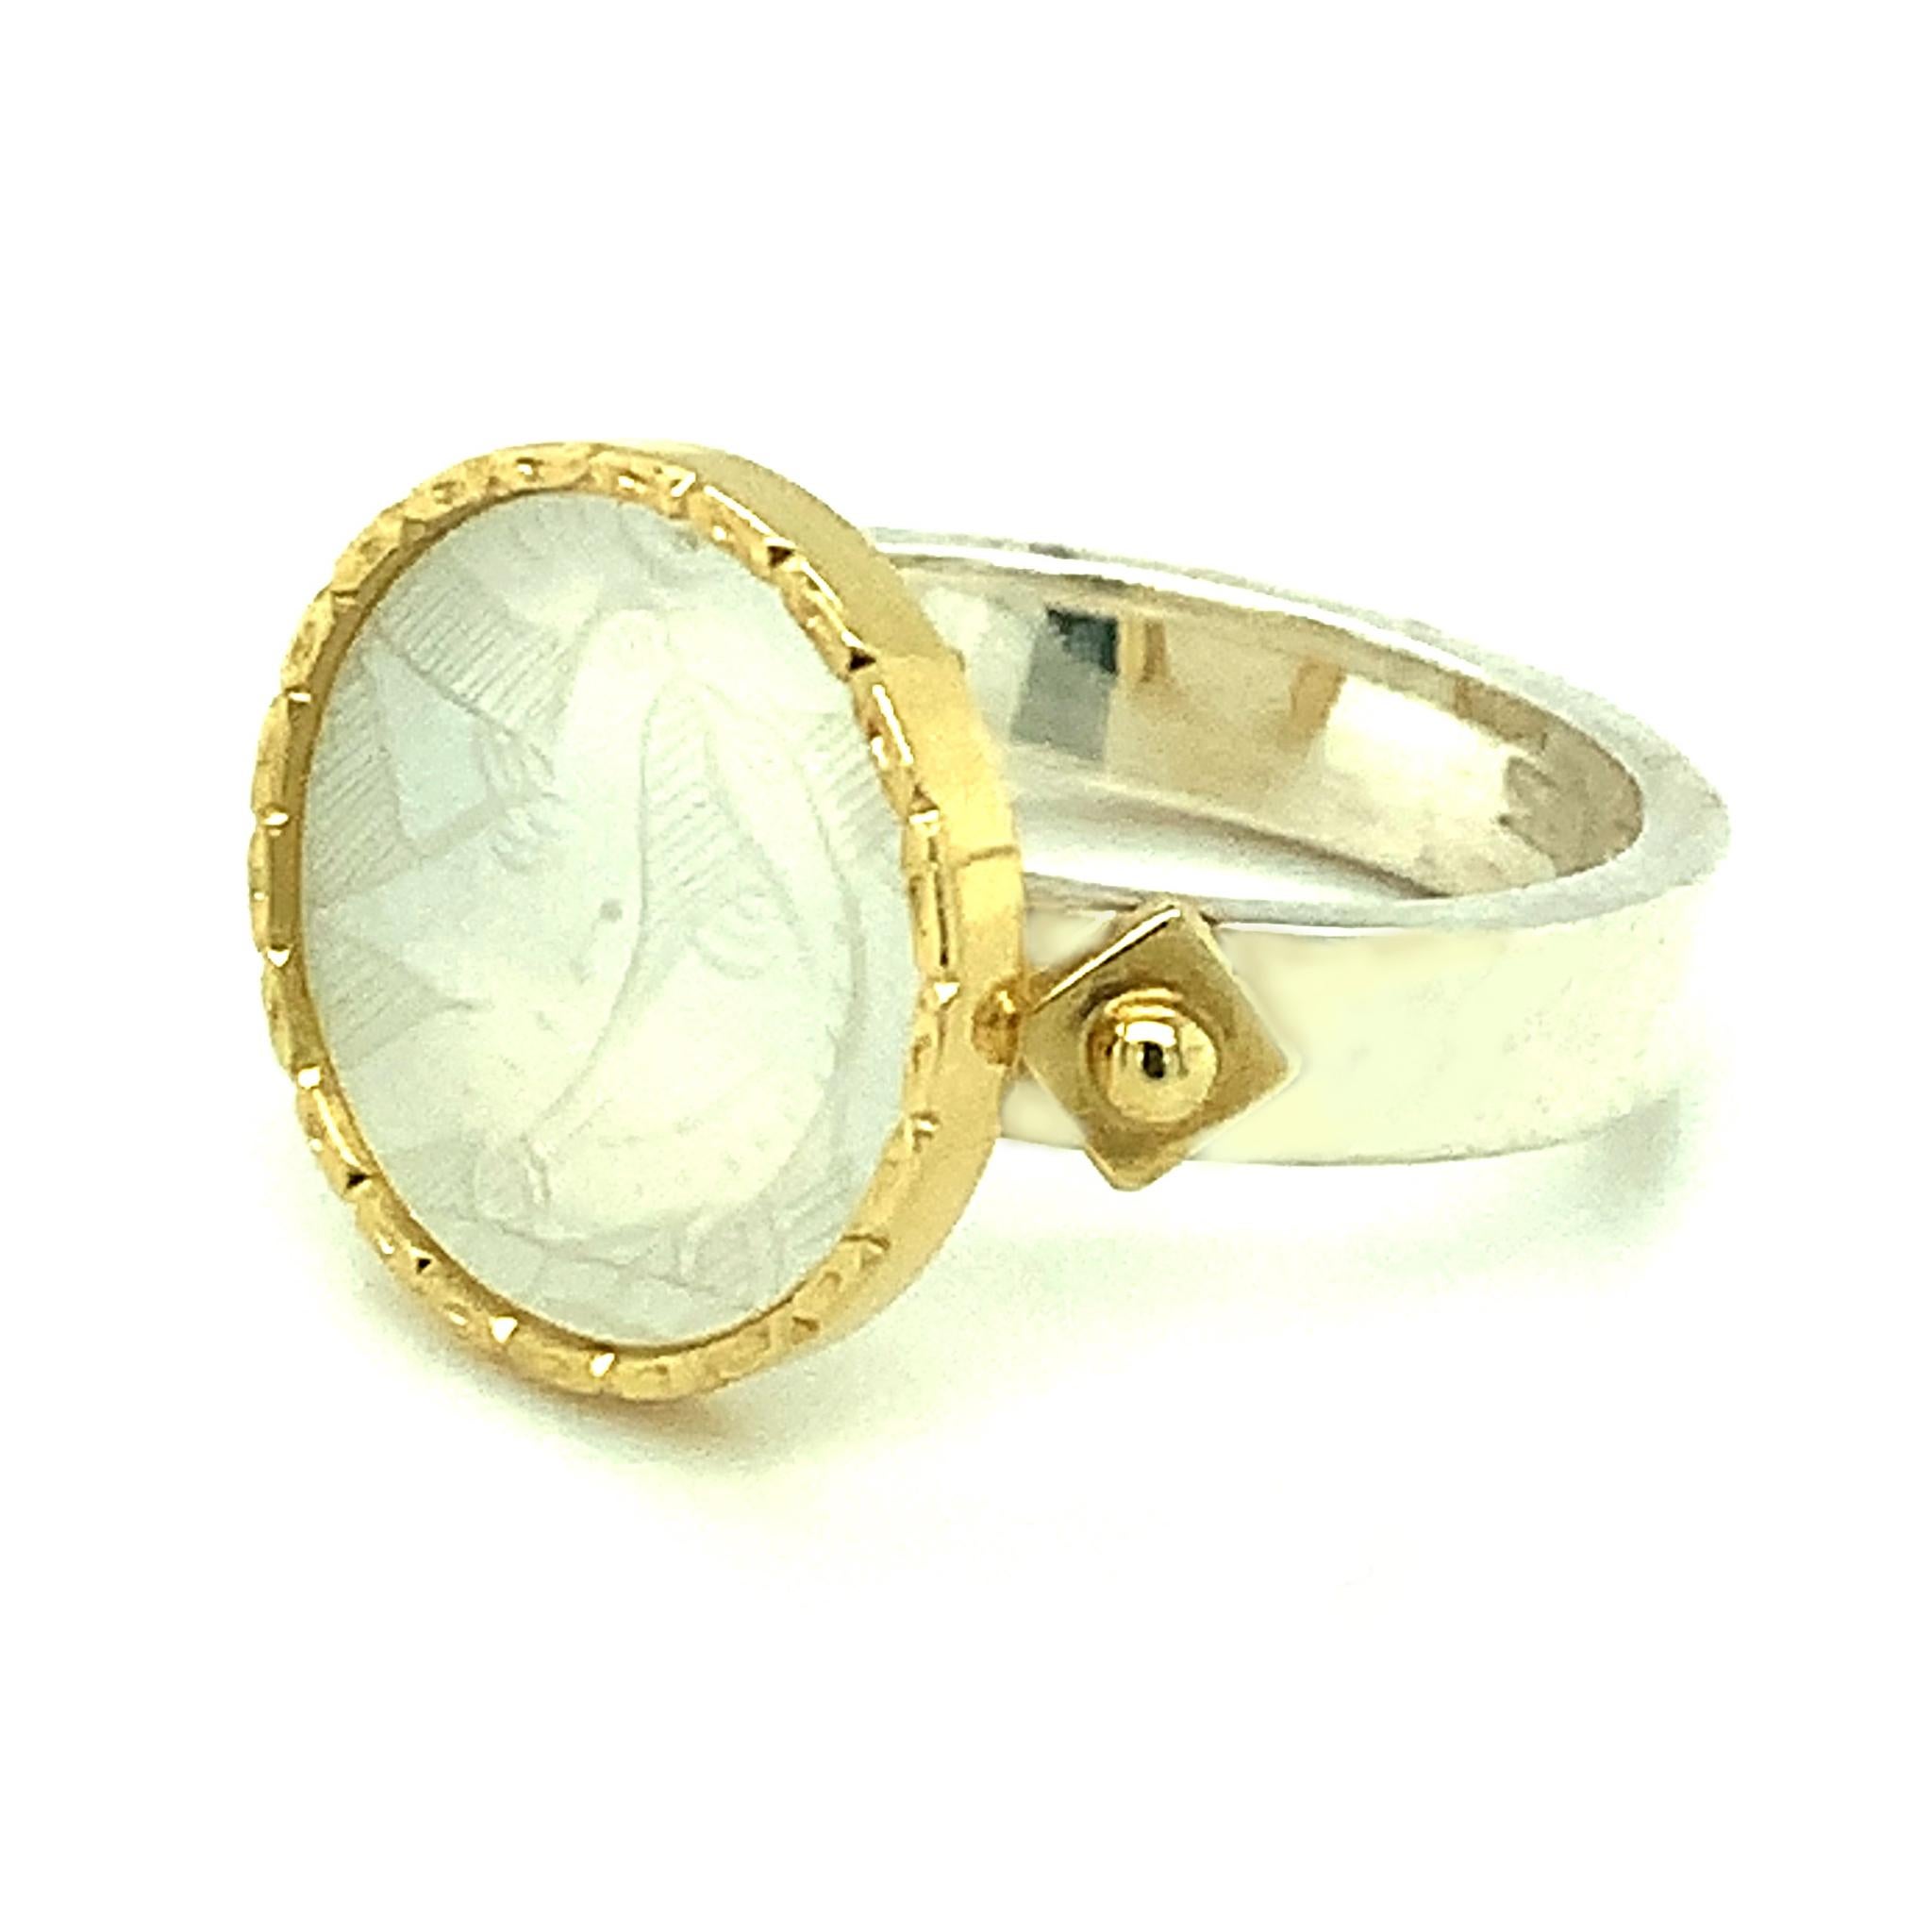 This ring features an antique, mother-of-pearl Chinese gambling counter with motifs dating back to the 18th century. The counter was originally carved in China for export to Britain. The British used these mother of pearl pieces much like we would